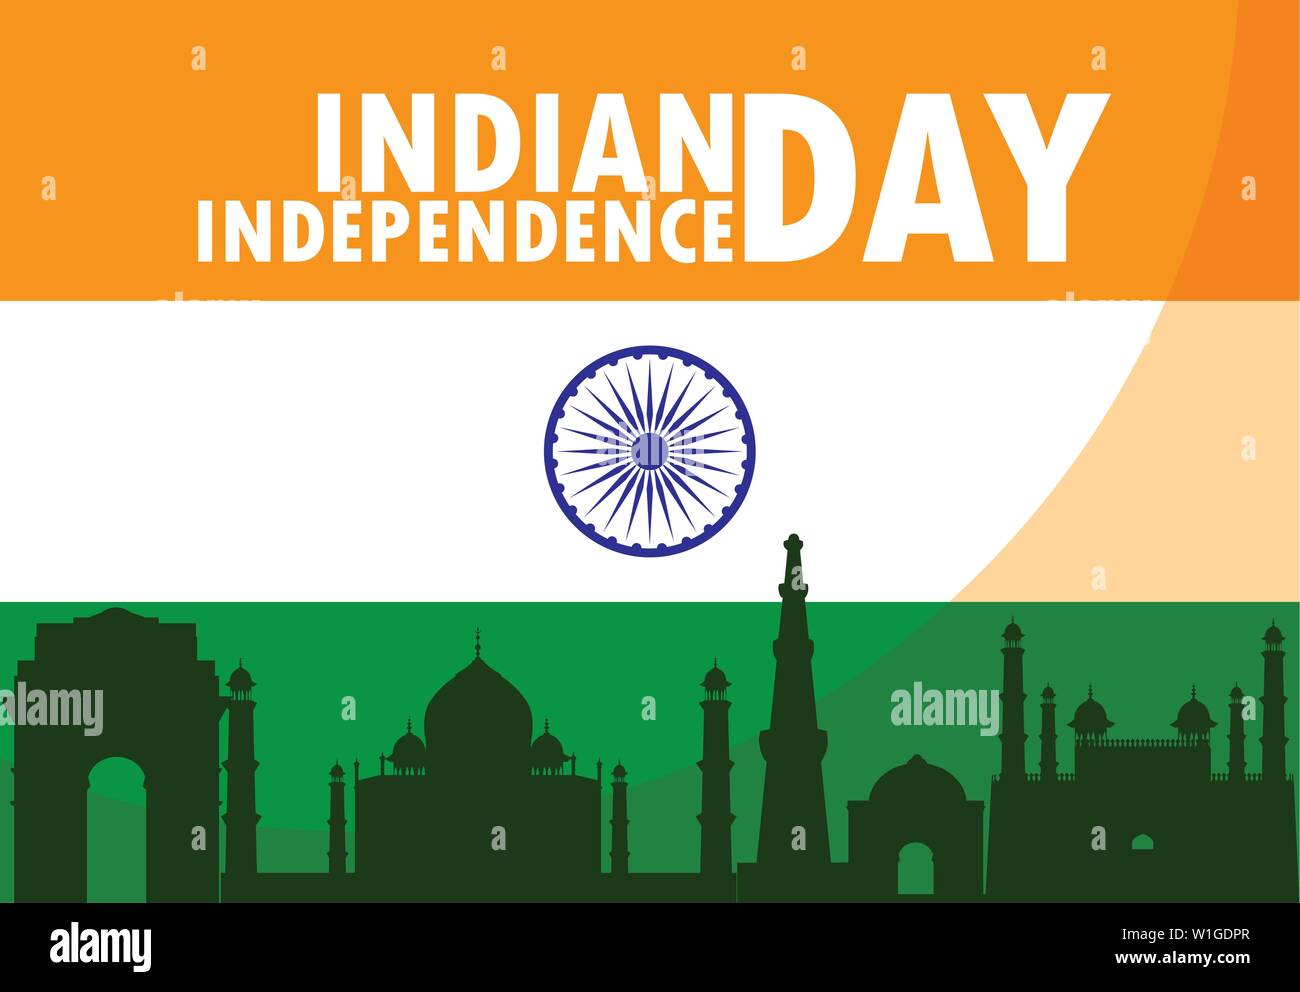 indian independence day with flag and buildings monuments vector illustration design Stock Vector